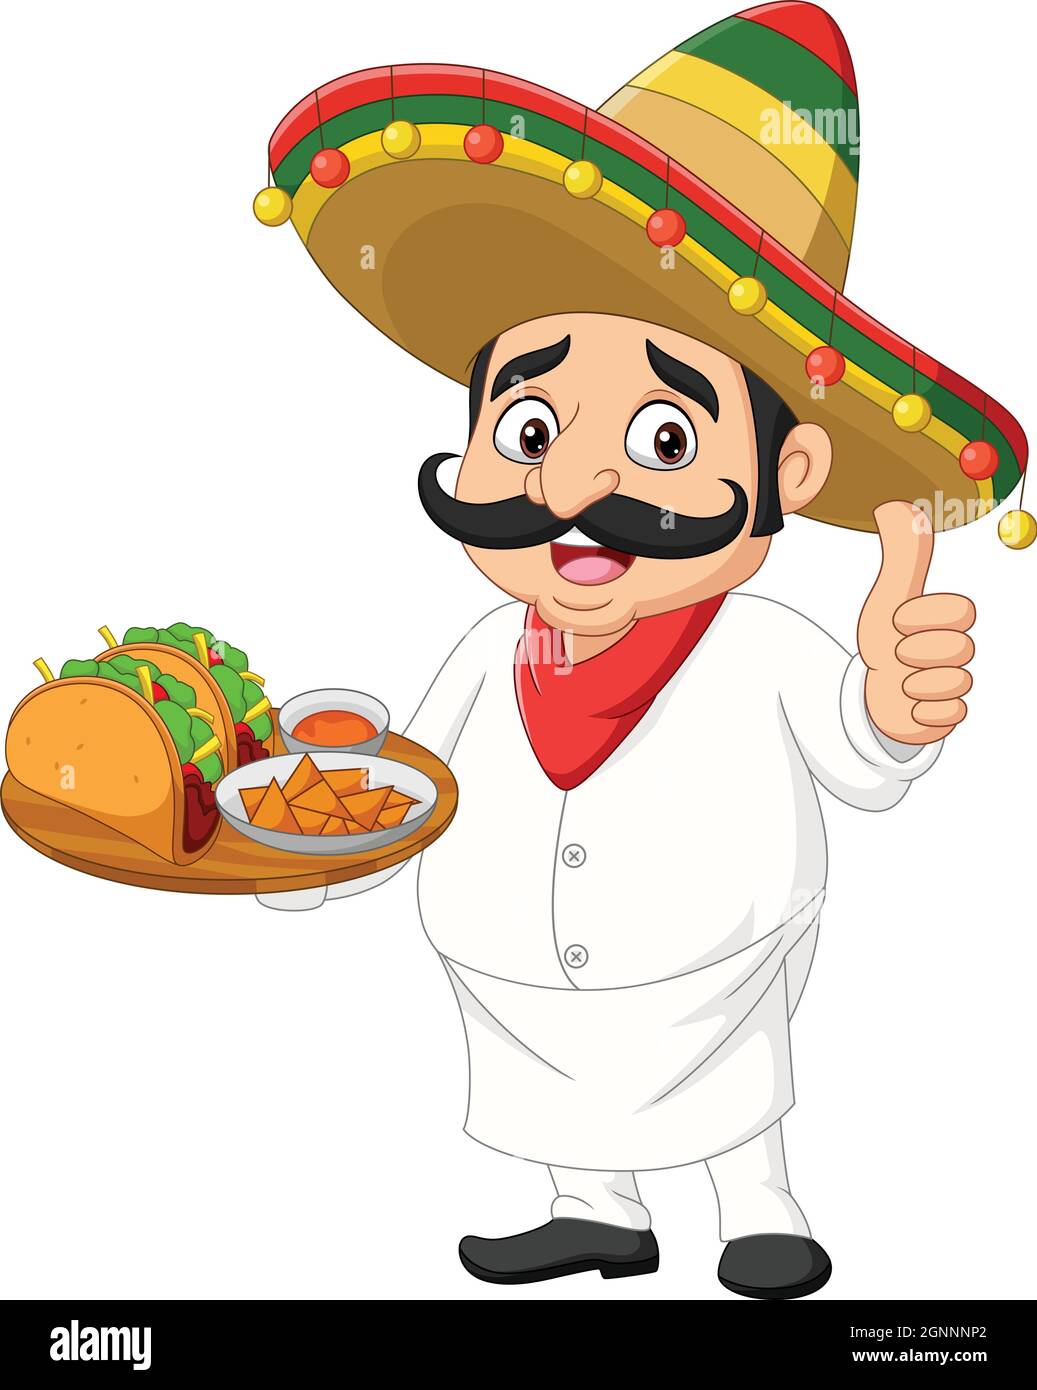 Mexican chef taco cartoon illustration Stock Vector Images - Alamy